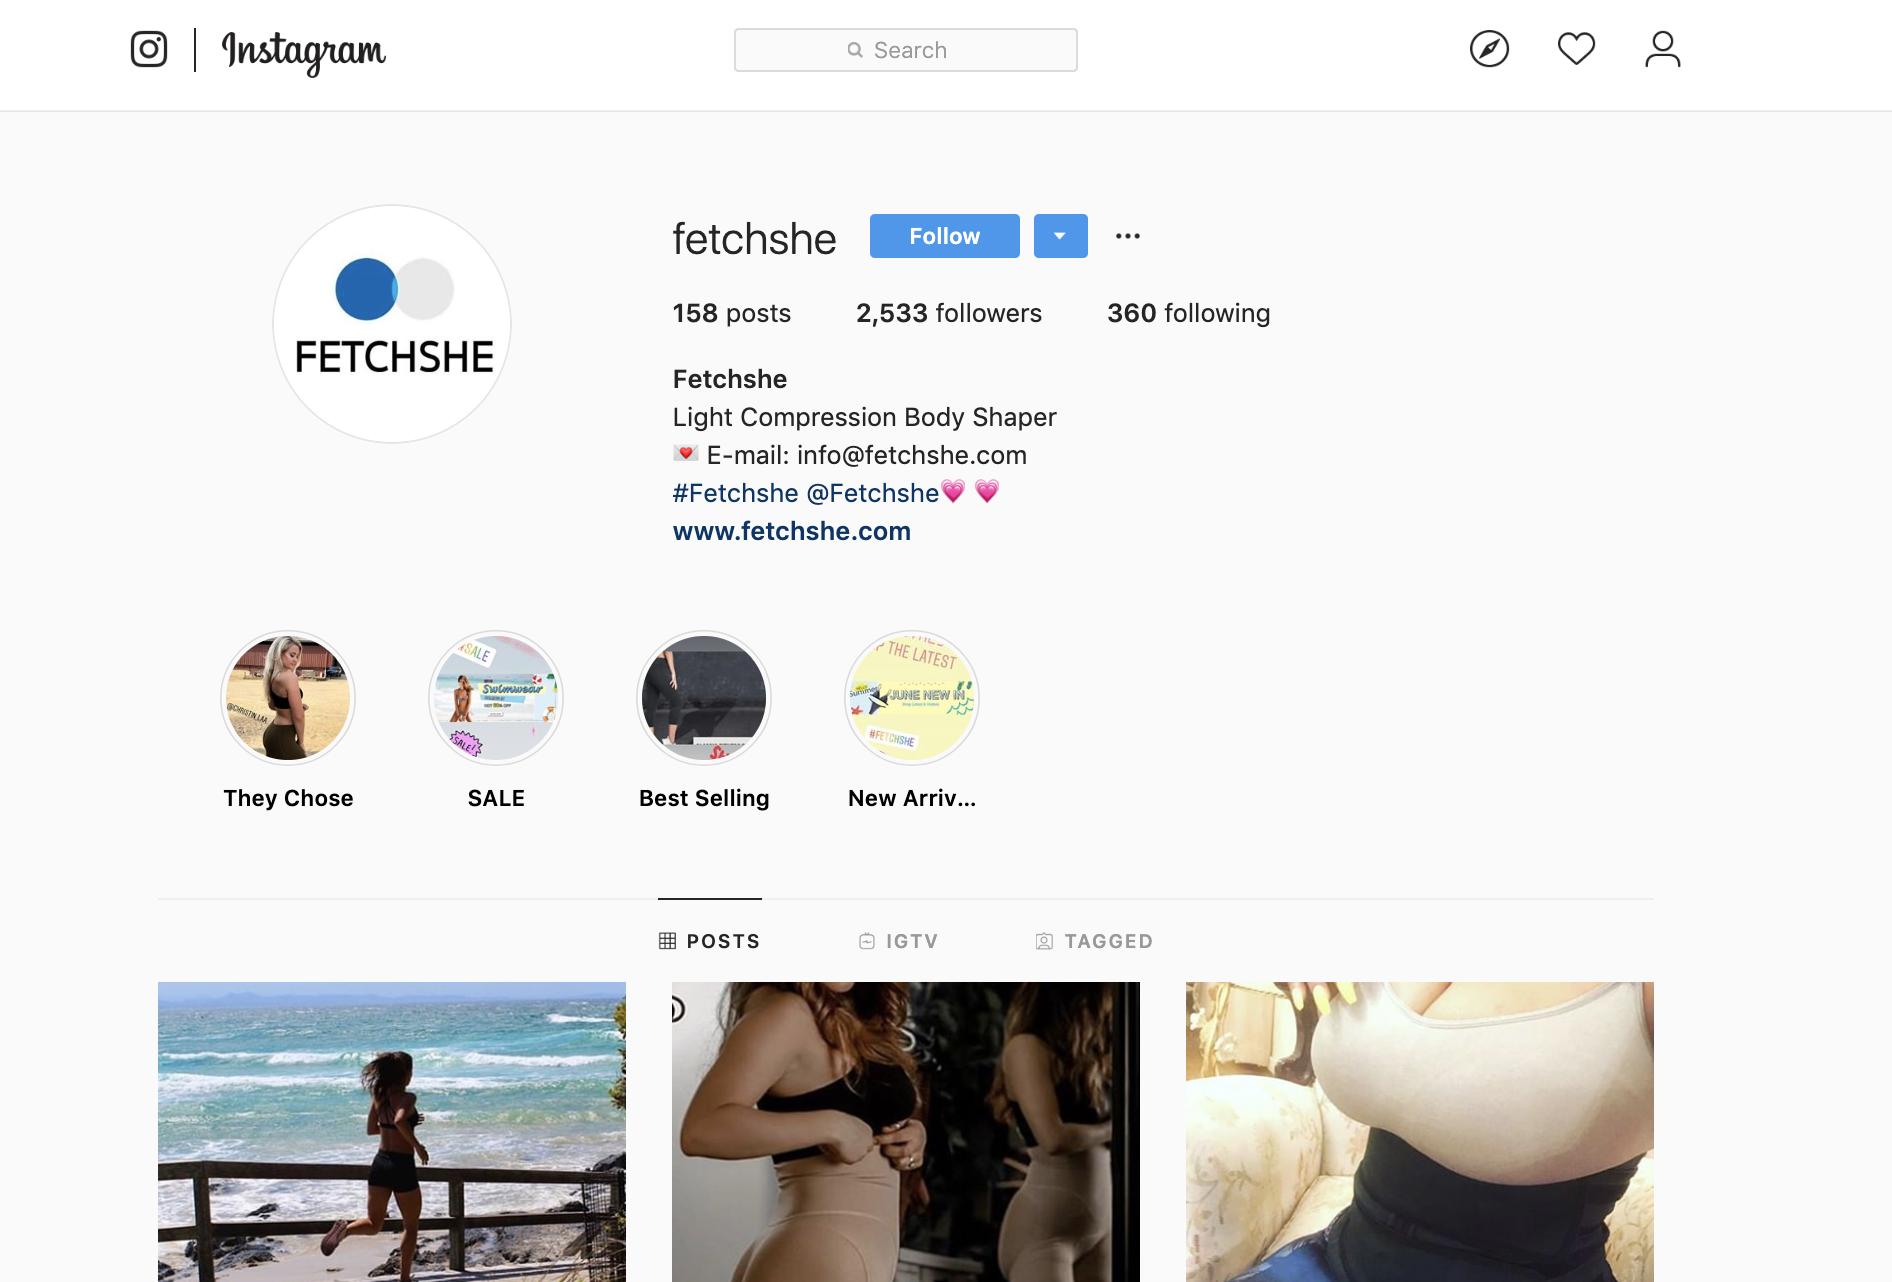 @FETCHSHE INSTAGRAM COMPLAINS ABOUT SCAM.